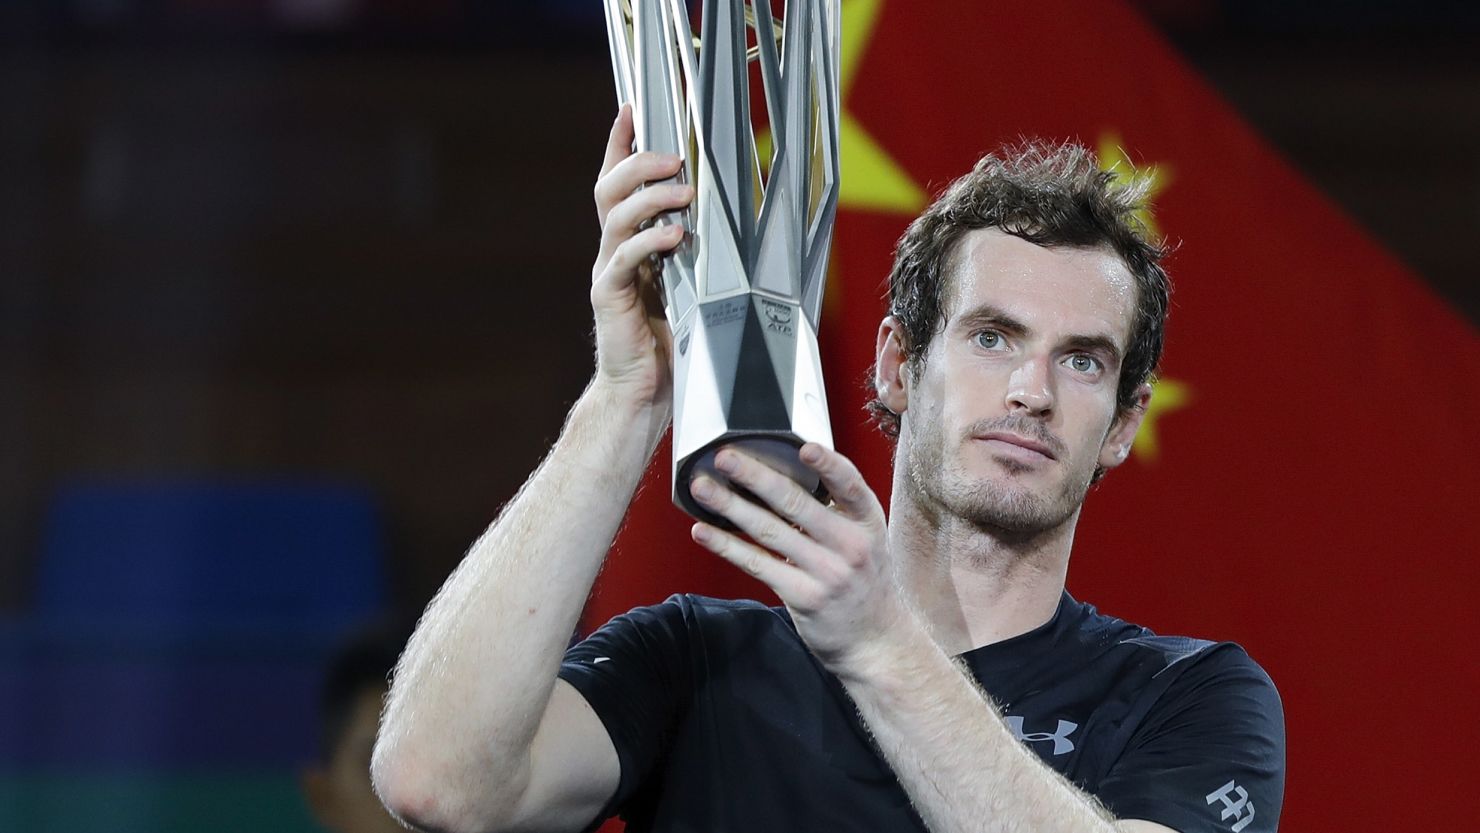 Andy Murray poses with trophy after beating Roberto Bautista Agut of Spain in the final of the Shanghai Masters.